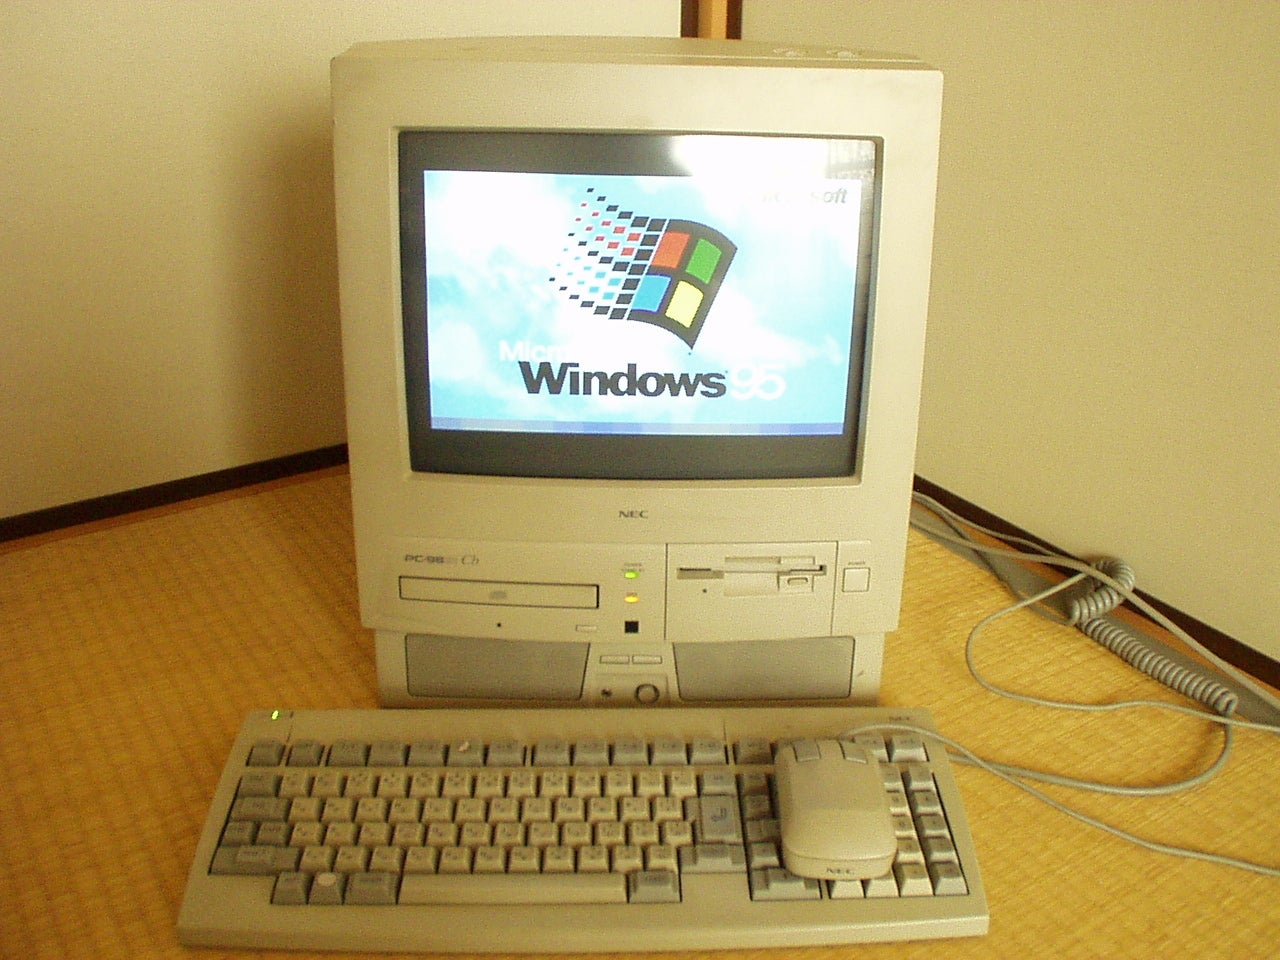 NEC PC9821 Cb, a vintage all-in-one computer with an integrated monitor and tower.